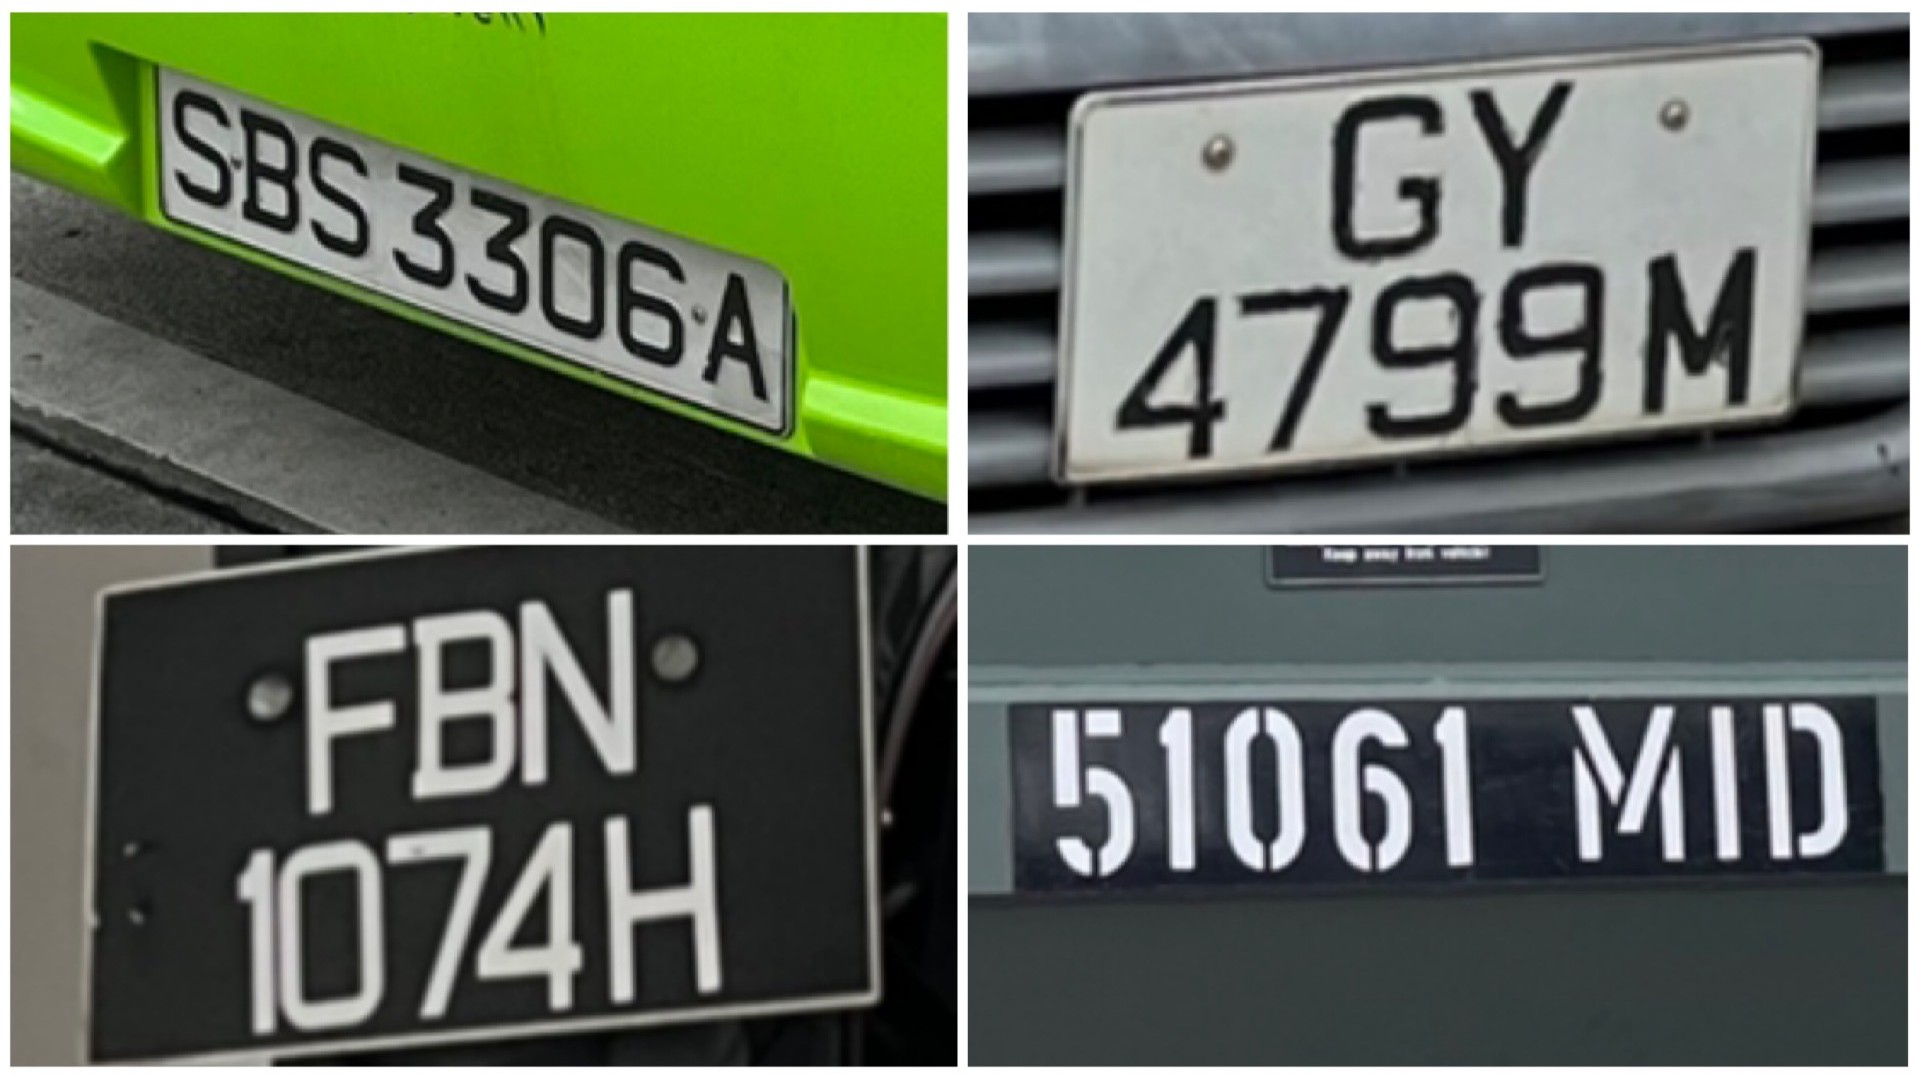 Guide To The Different Car Licence Plates In Singapore (Colours